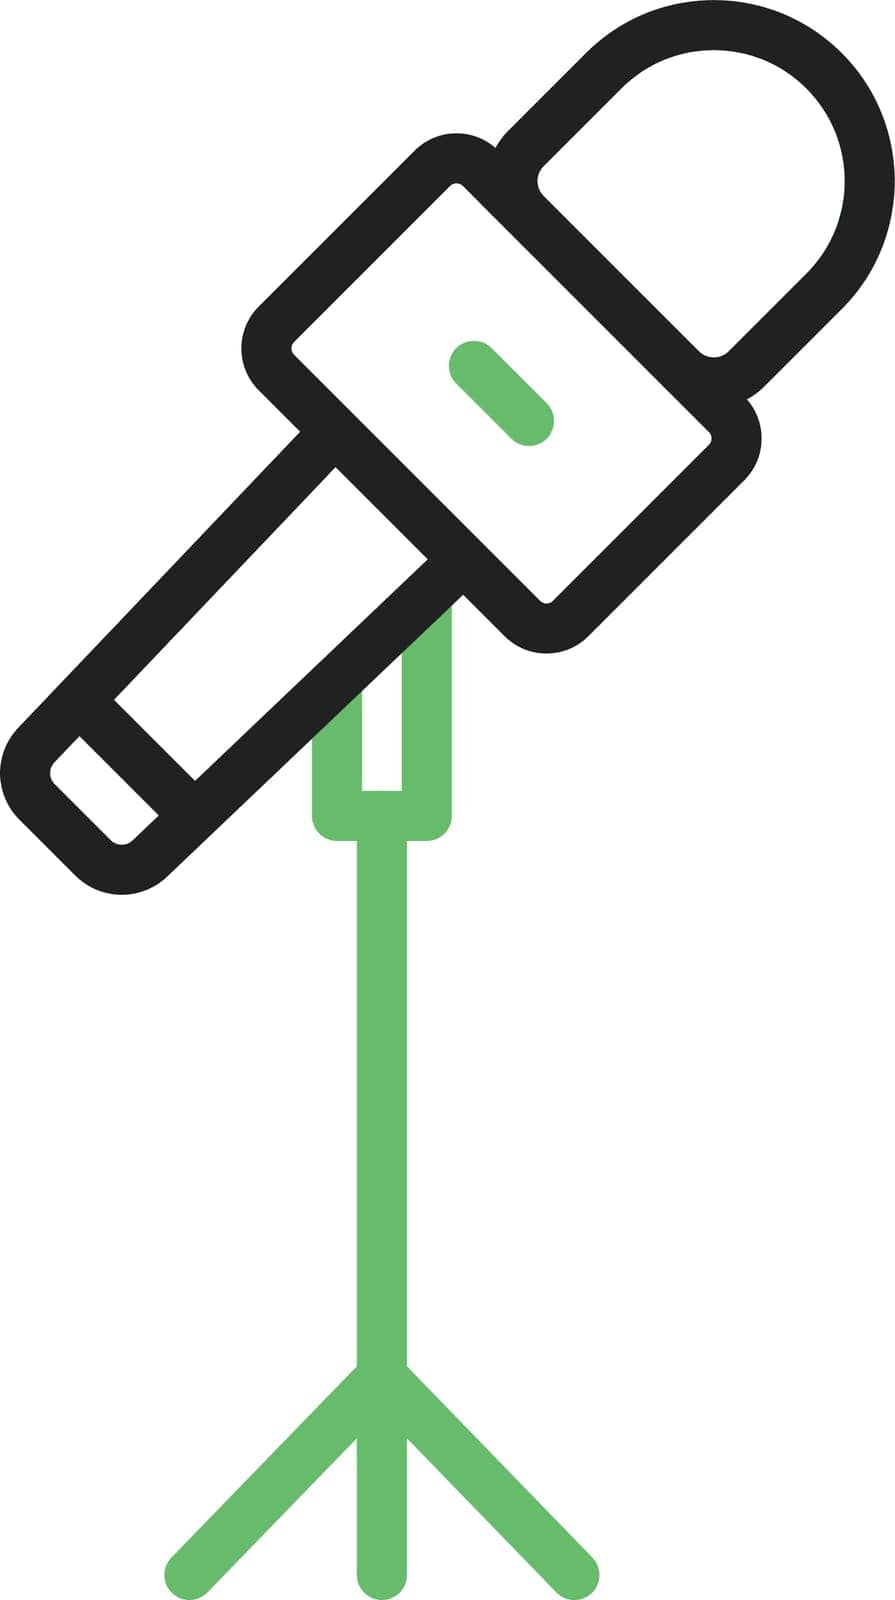 Mic Stand icon vector image. Suitable for mobile application web application and print media.